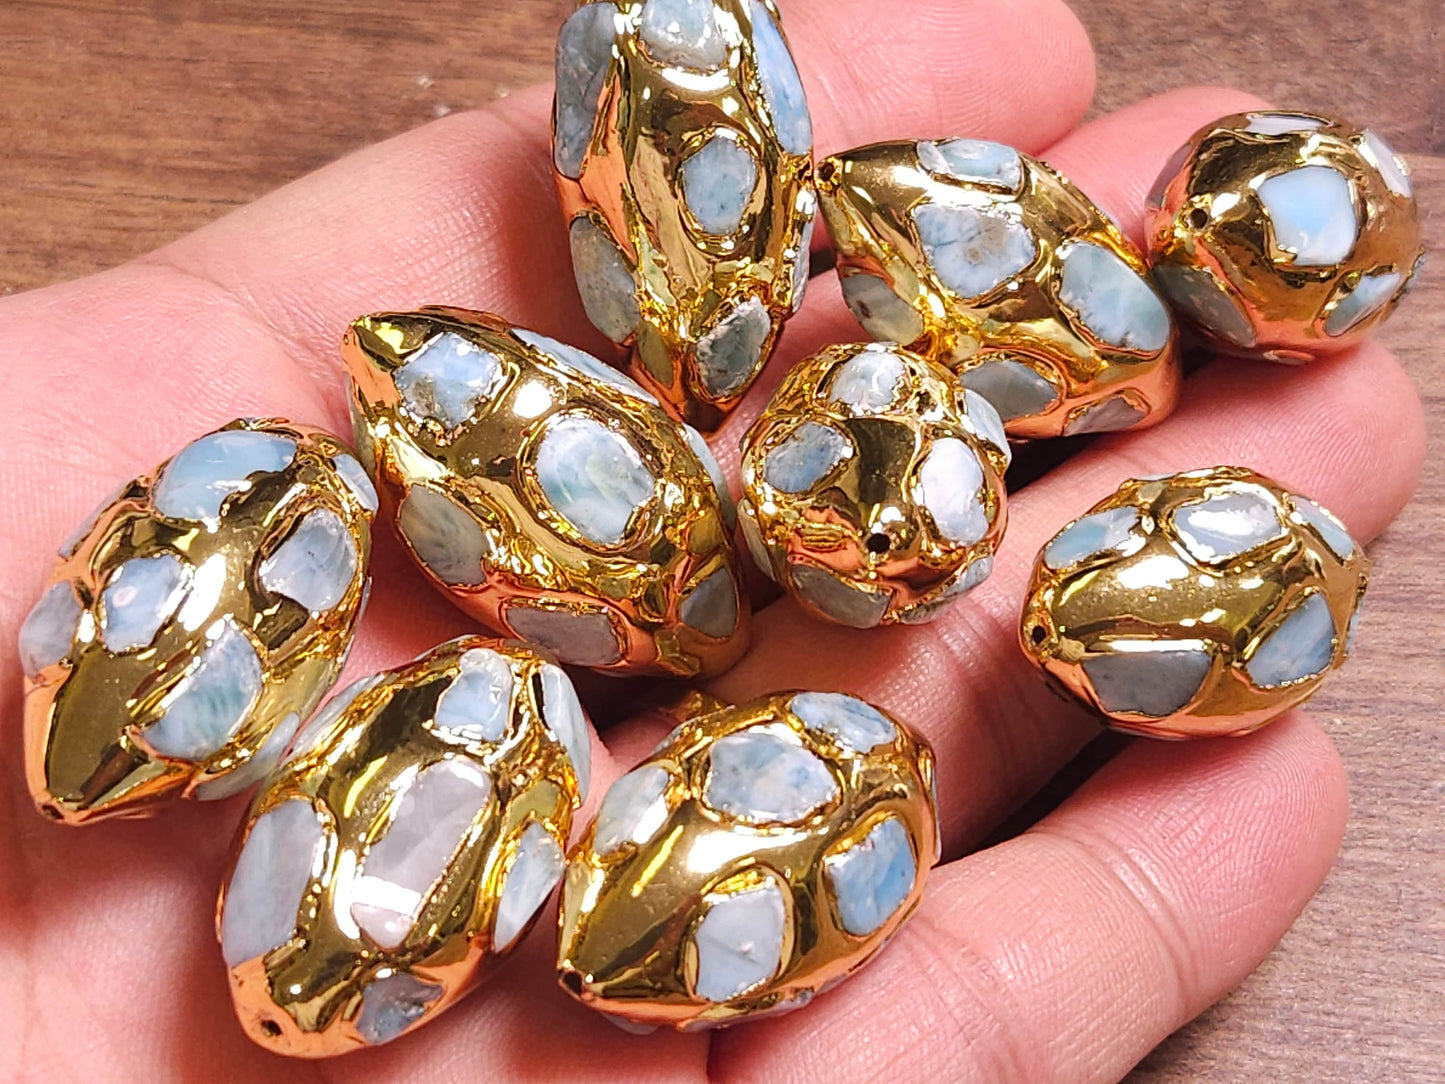 Natural Dominican Larimat Oval inlaid Pave bead 18x36mm oval focal bead, 14K Gold Plated, 1 piece